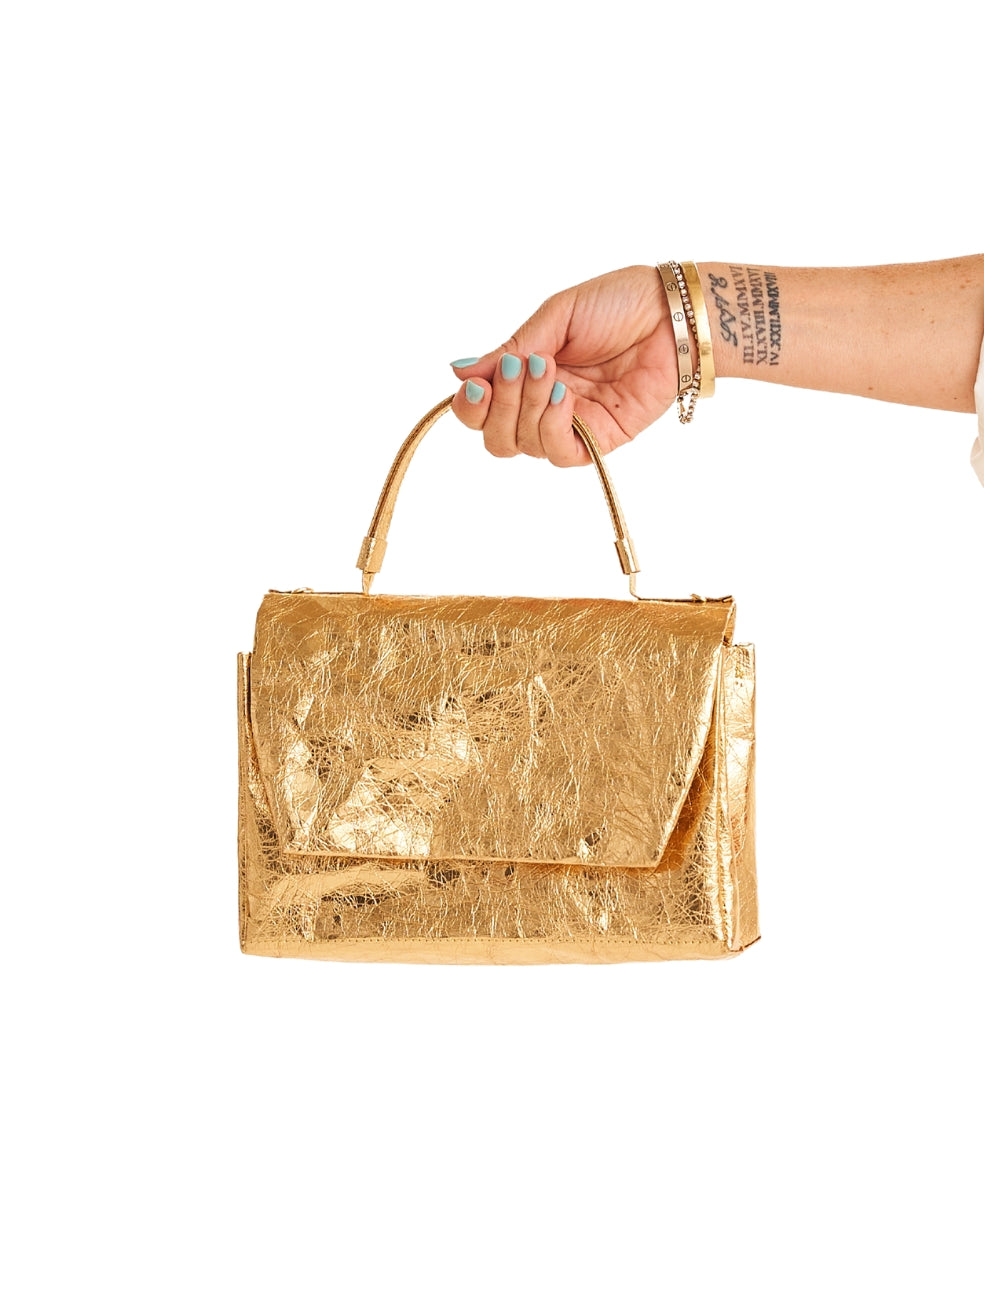 Paper Purse Gold Metallic Upcycled FREED Eco Friendly Bag